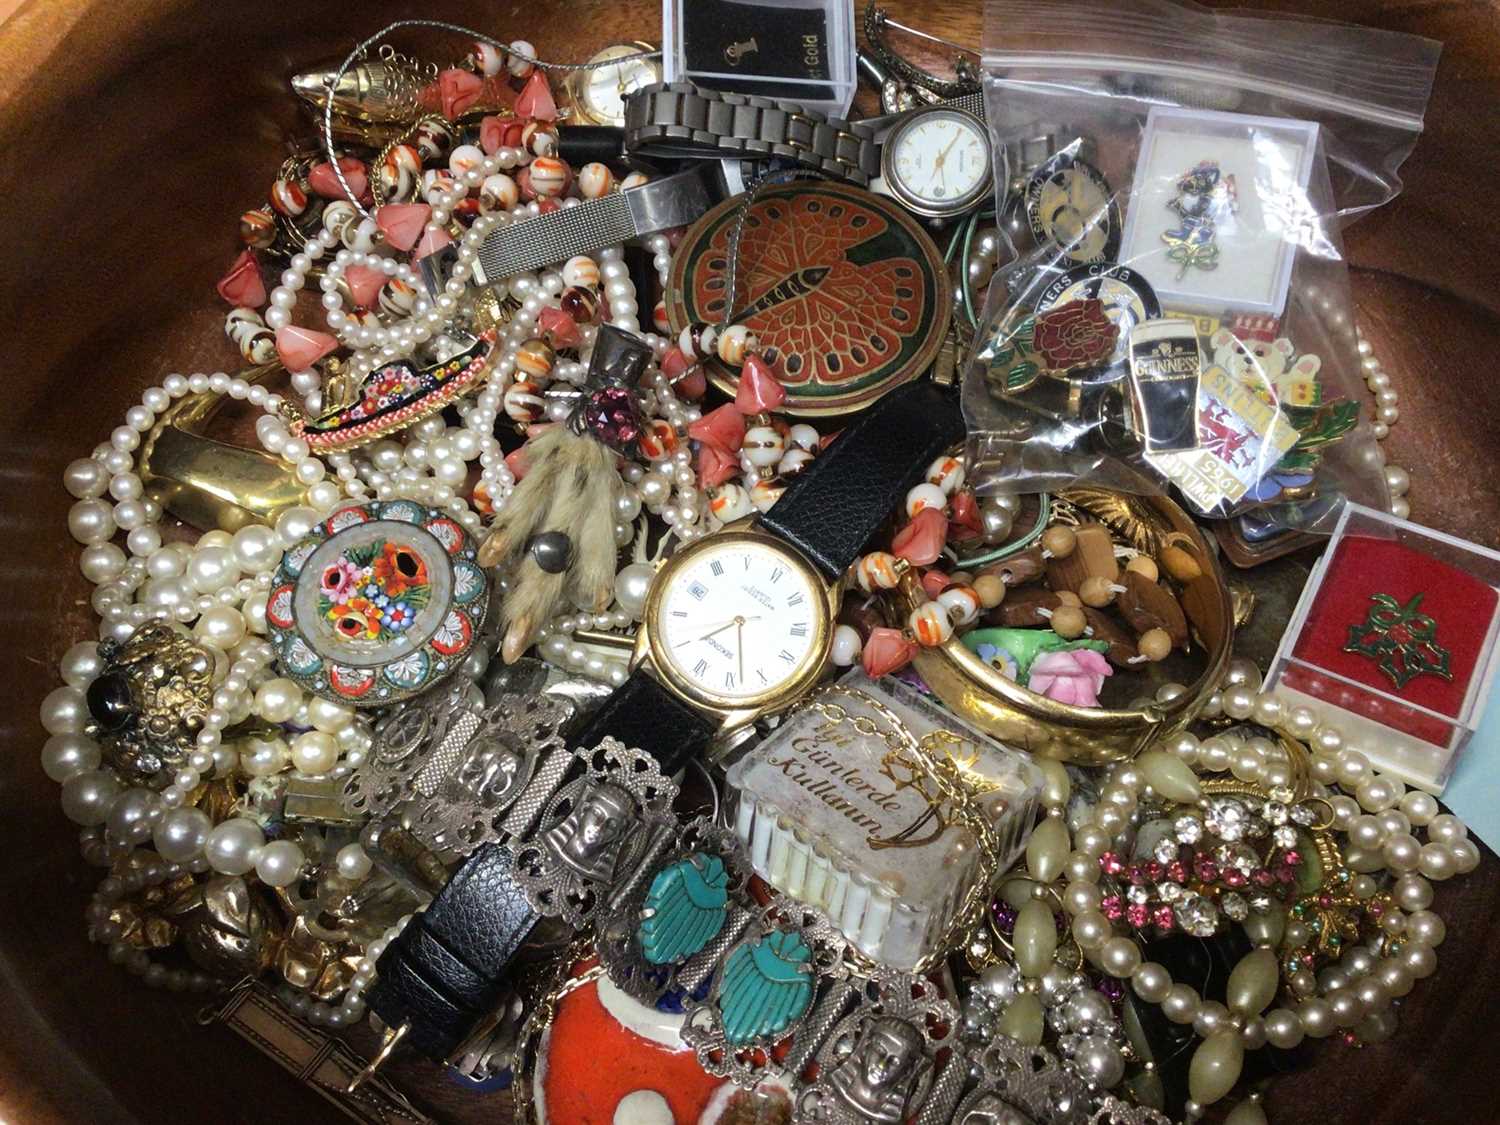 Lot 10 - Costume jewellery including simulated pearl necklaces, micro mosaic brooch, collection of enamelled pins, wristwatches and bijouterie